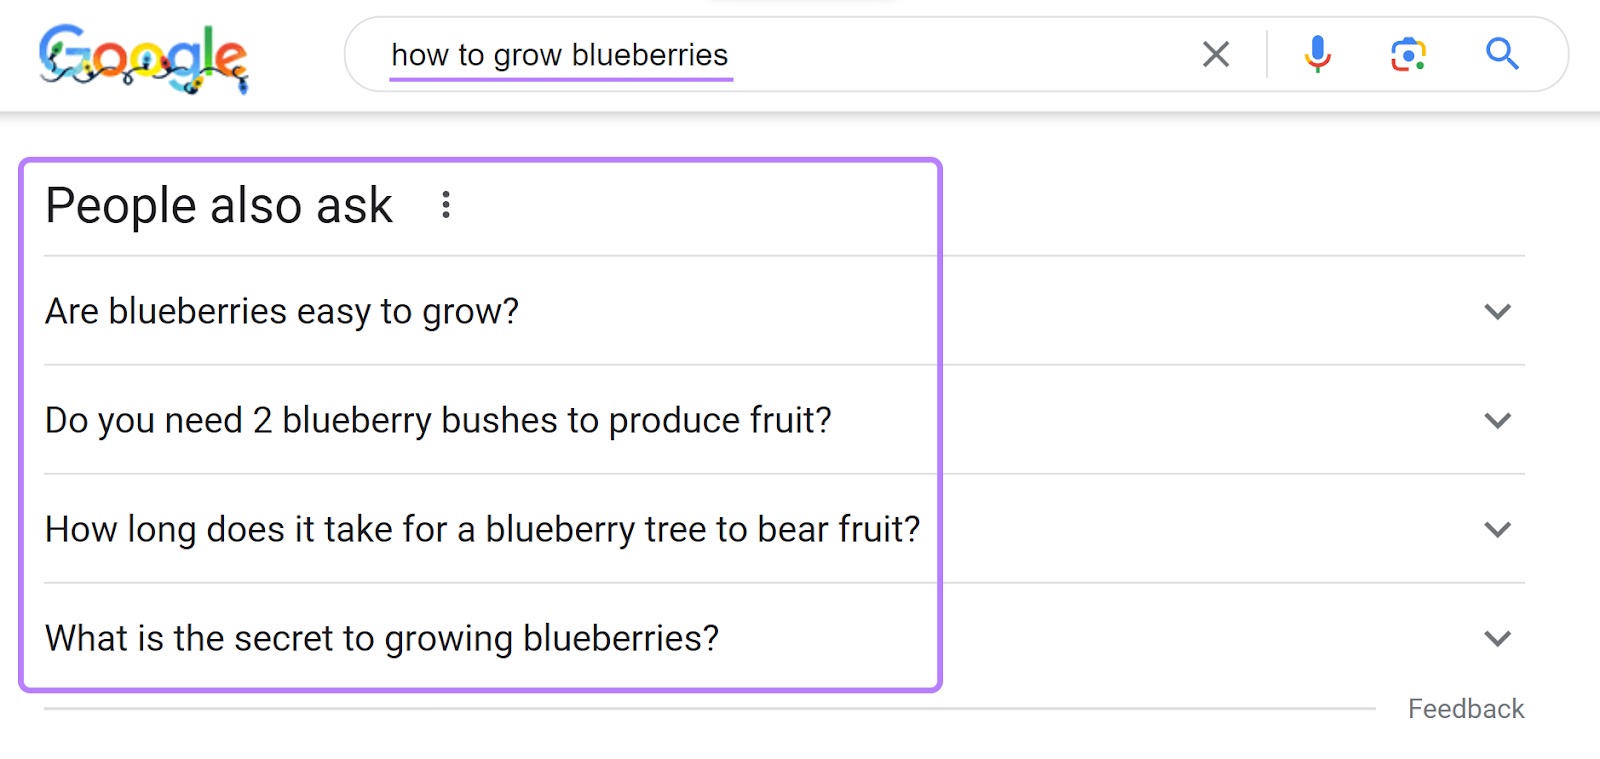 "People also ask" feature on Google SERP for "how to grow blueberries" query